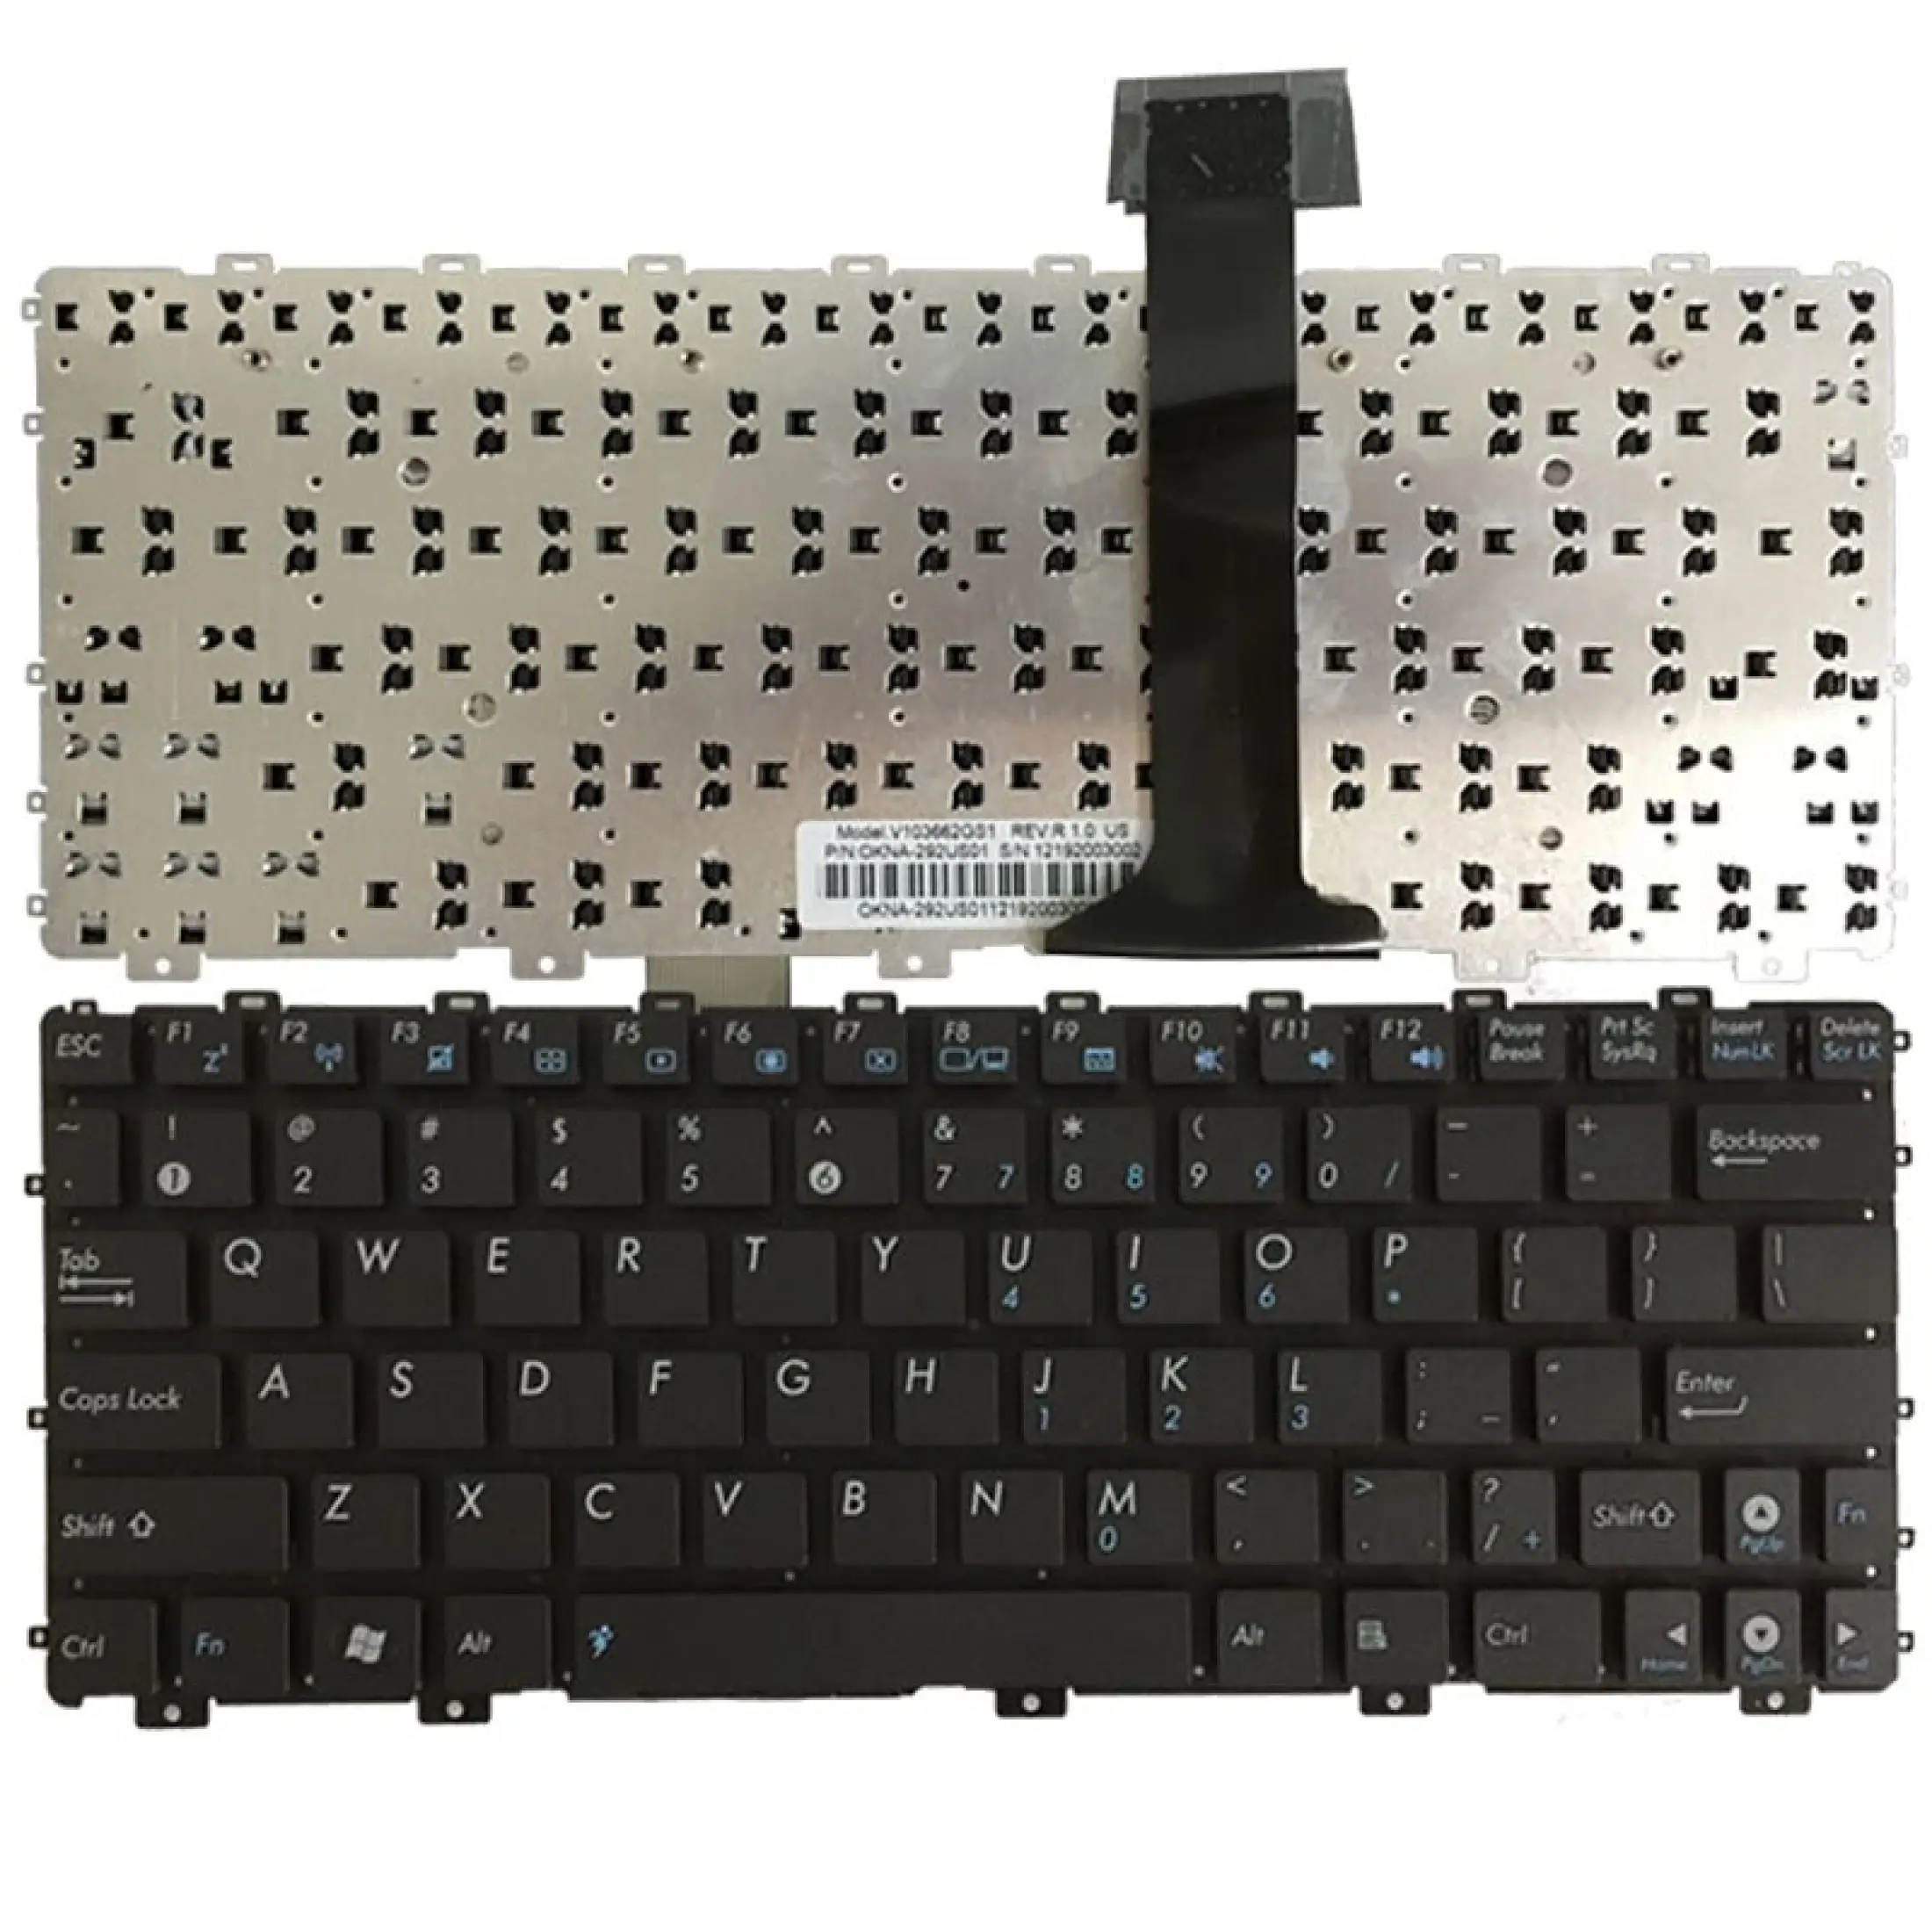 Laptop Keyboard For Asus Eee Pc 1011 1015 1015pw X101 X101ch Lazada Ph